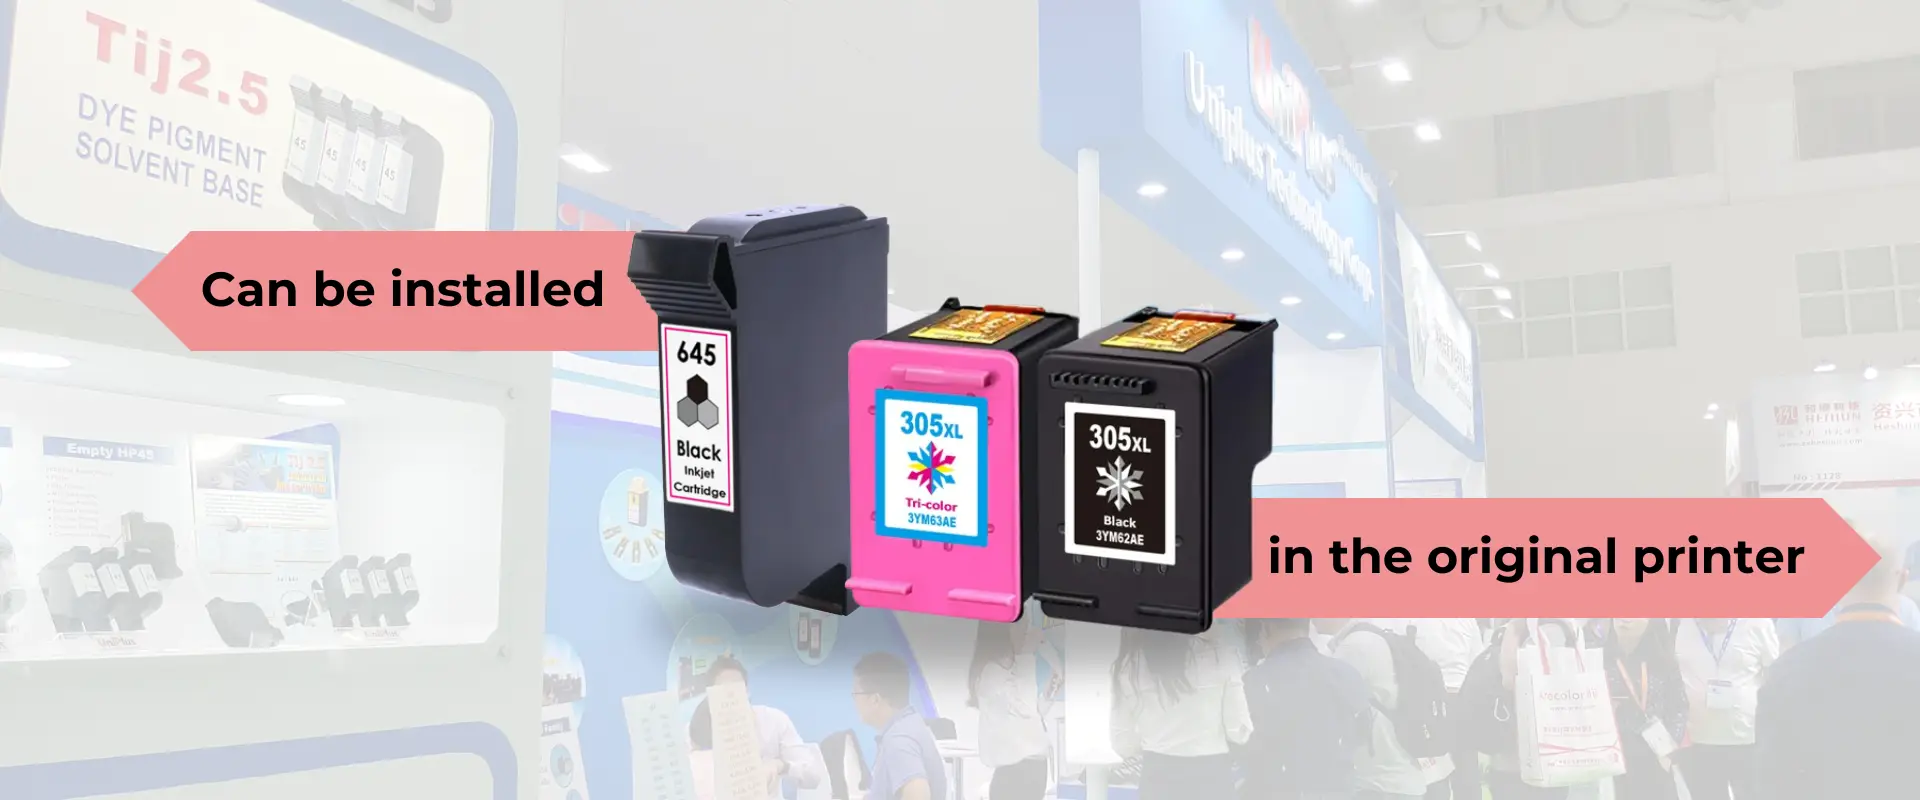 Uniplus supply third-party ink cartridges